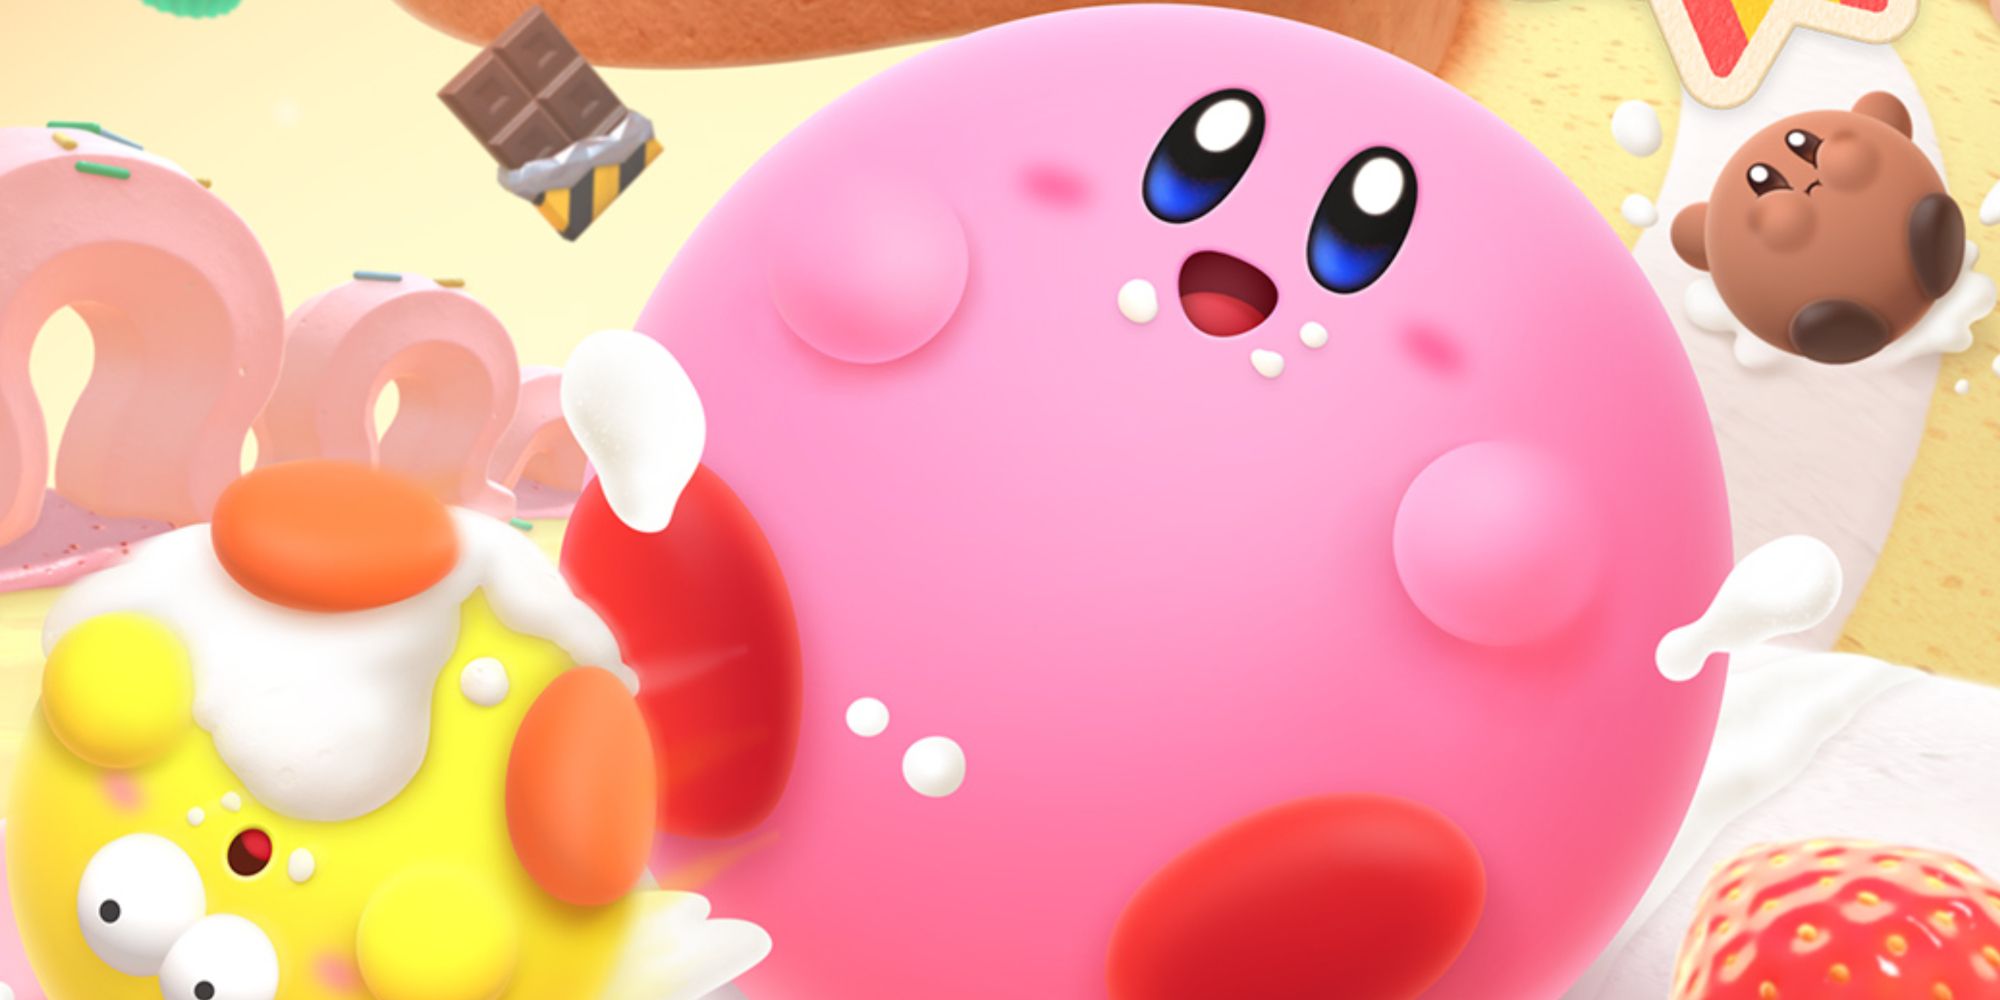 Kirby's Dream Buffet August Release Date Revealed In Gameplay Trailer